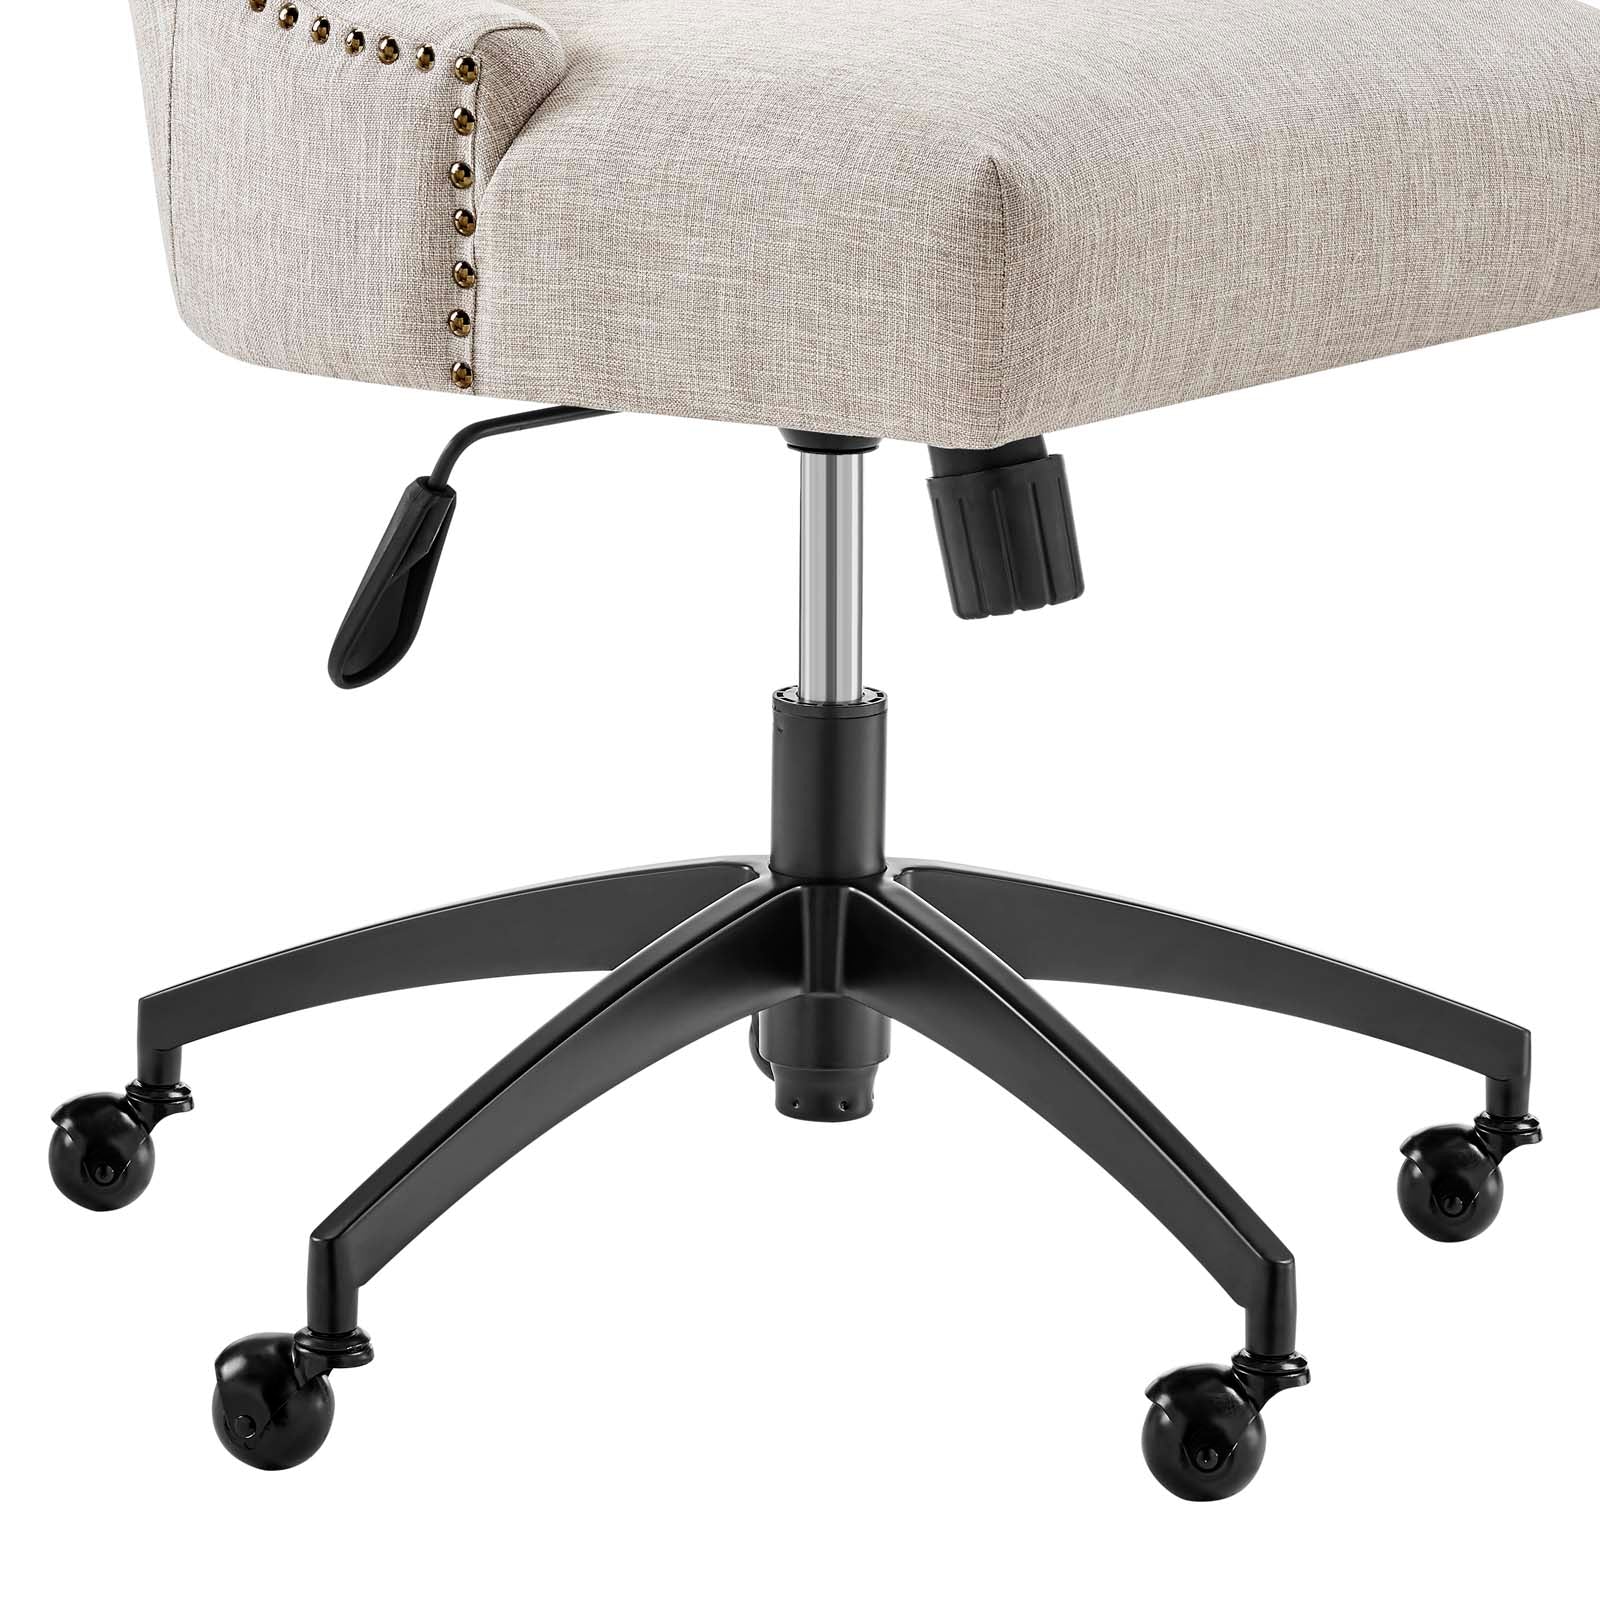 Modway Task Chairs - Empower Channel Tufted Fabric Office Chair Black Beige